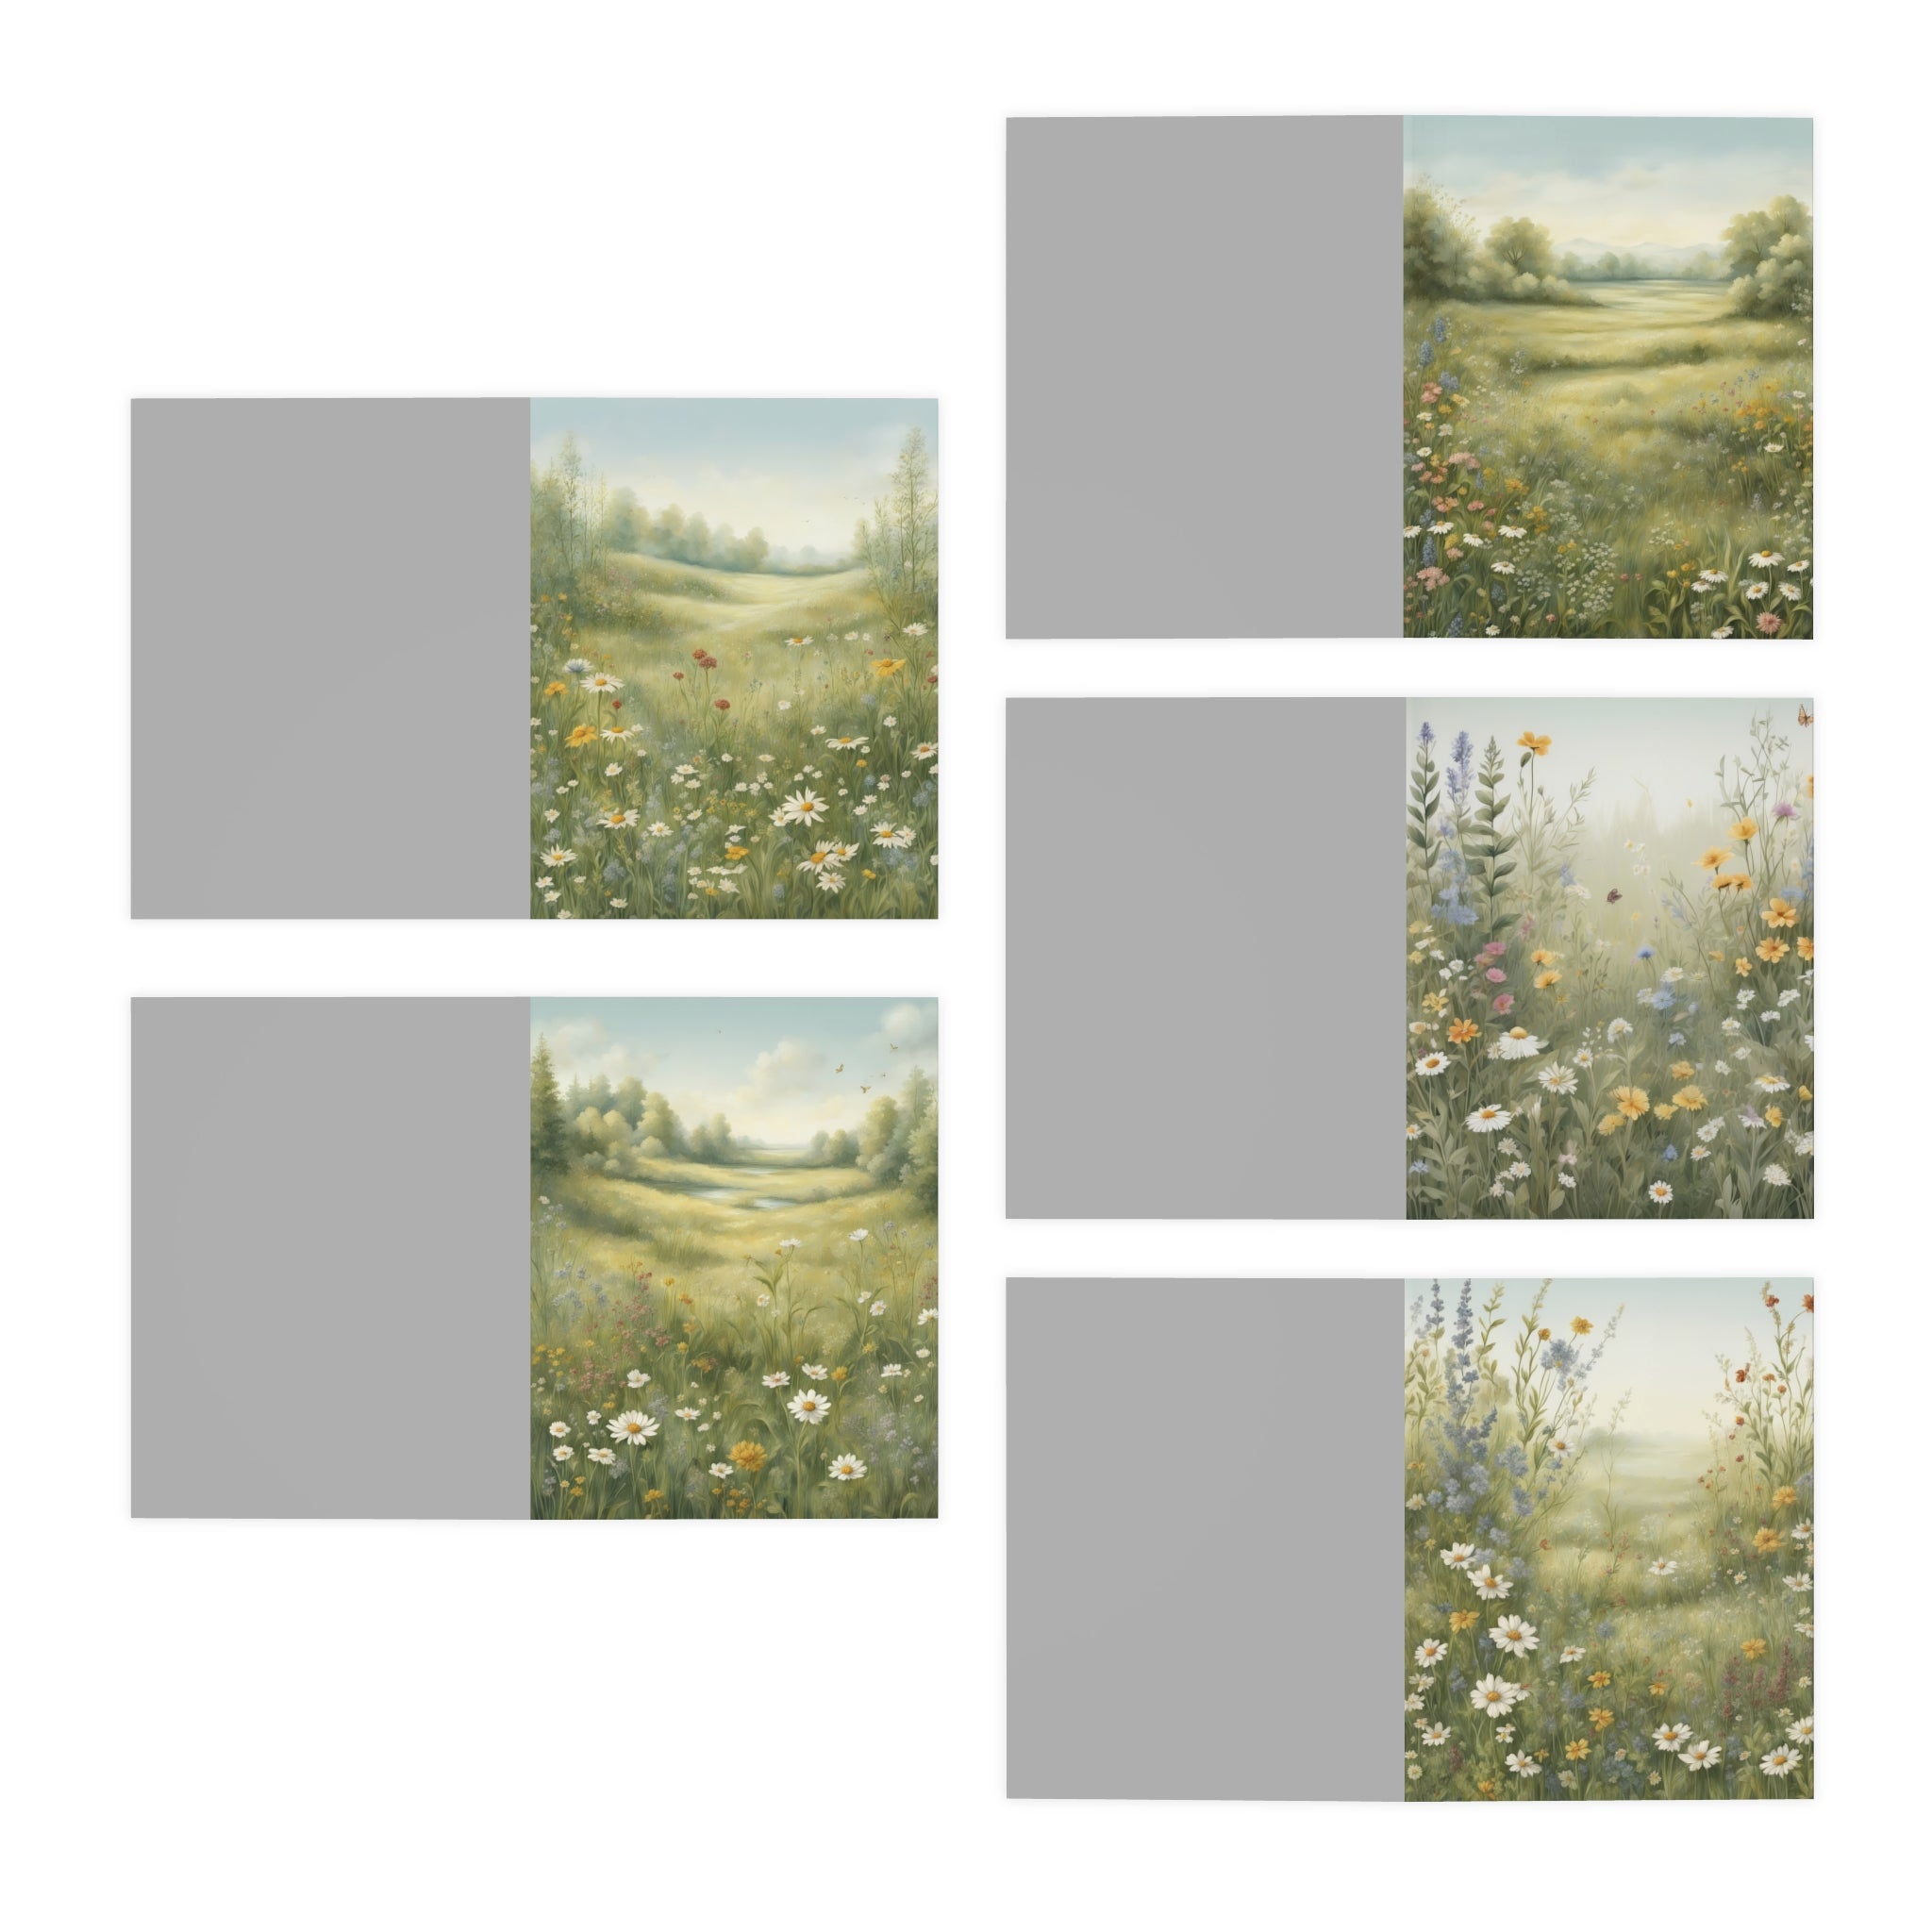 Multi-Design Greeting Cards (5-Pack), In the meadow